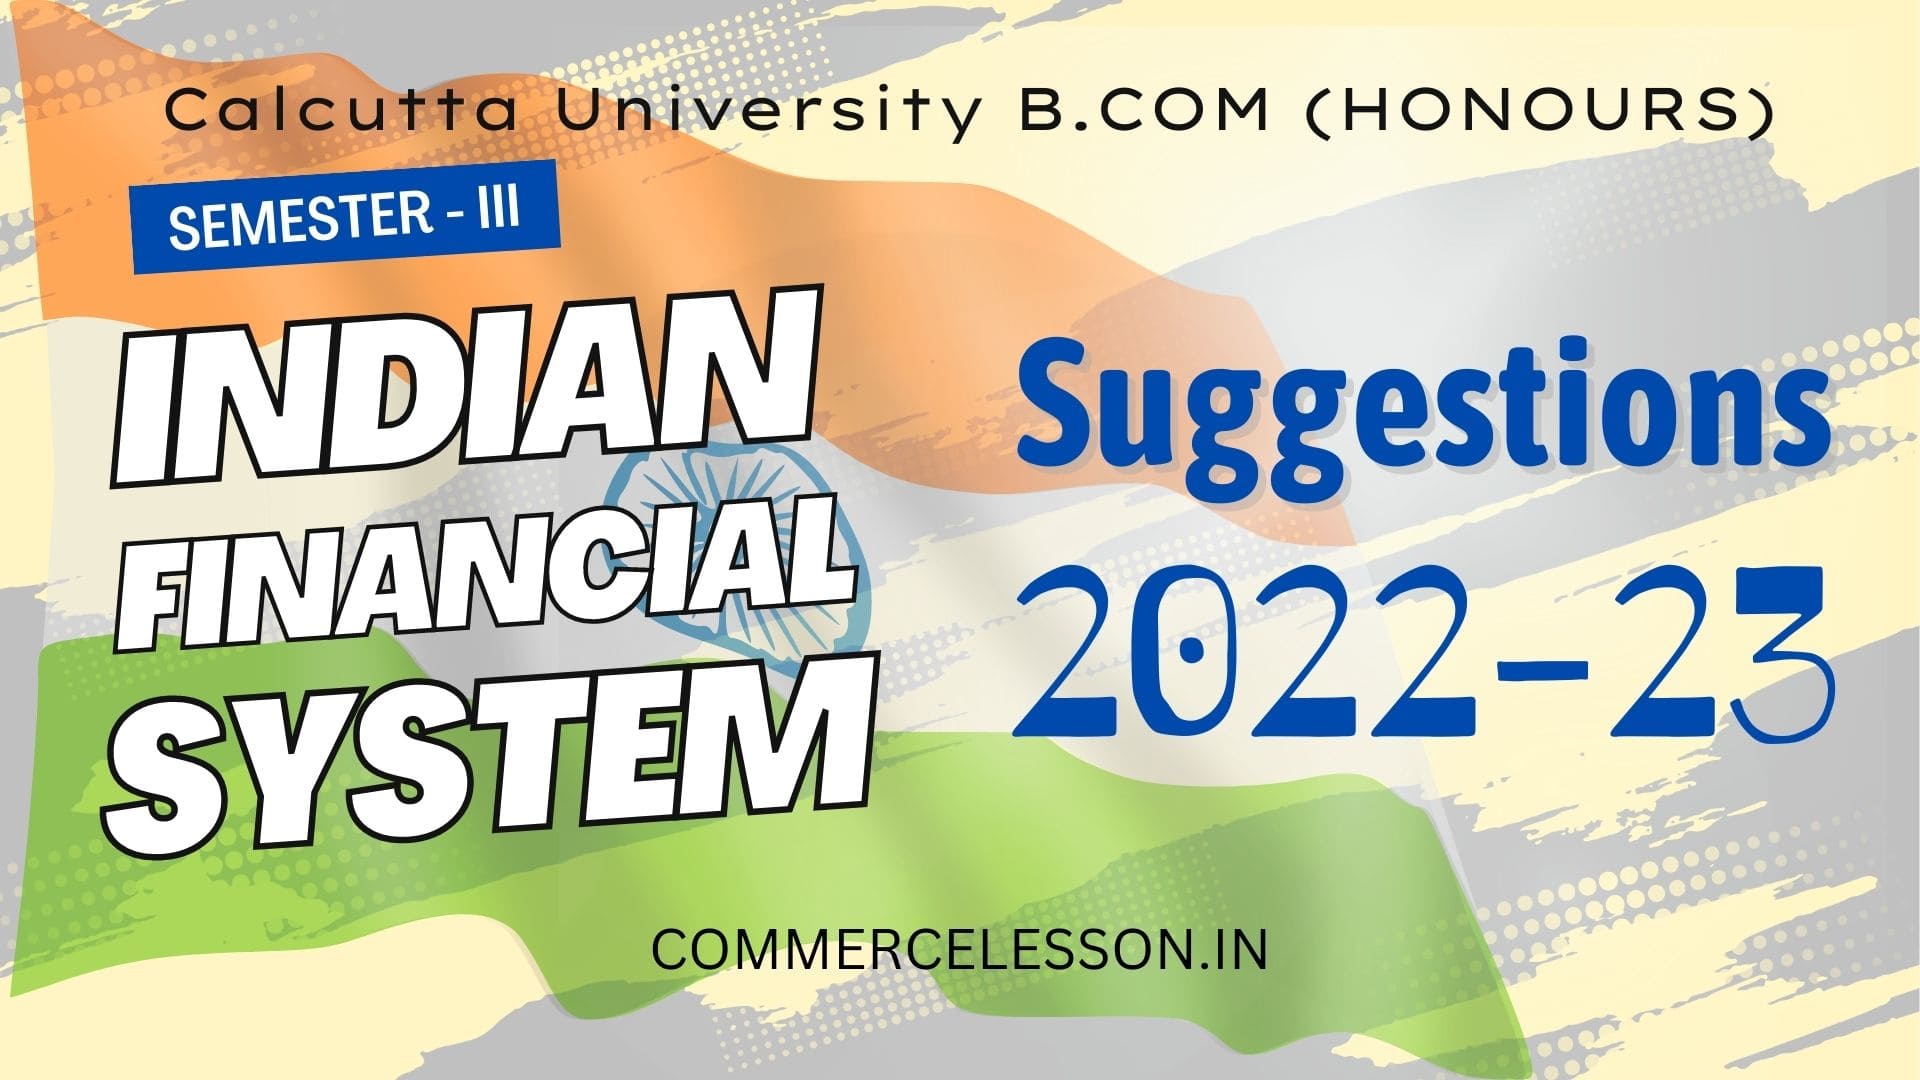 Indian Financial System Suggestions for B.COM Honours Semester 3